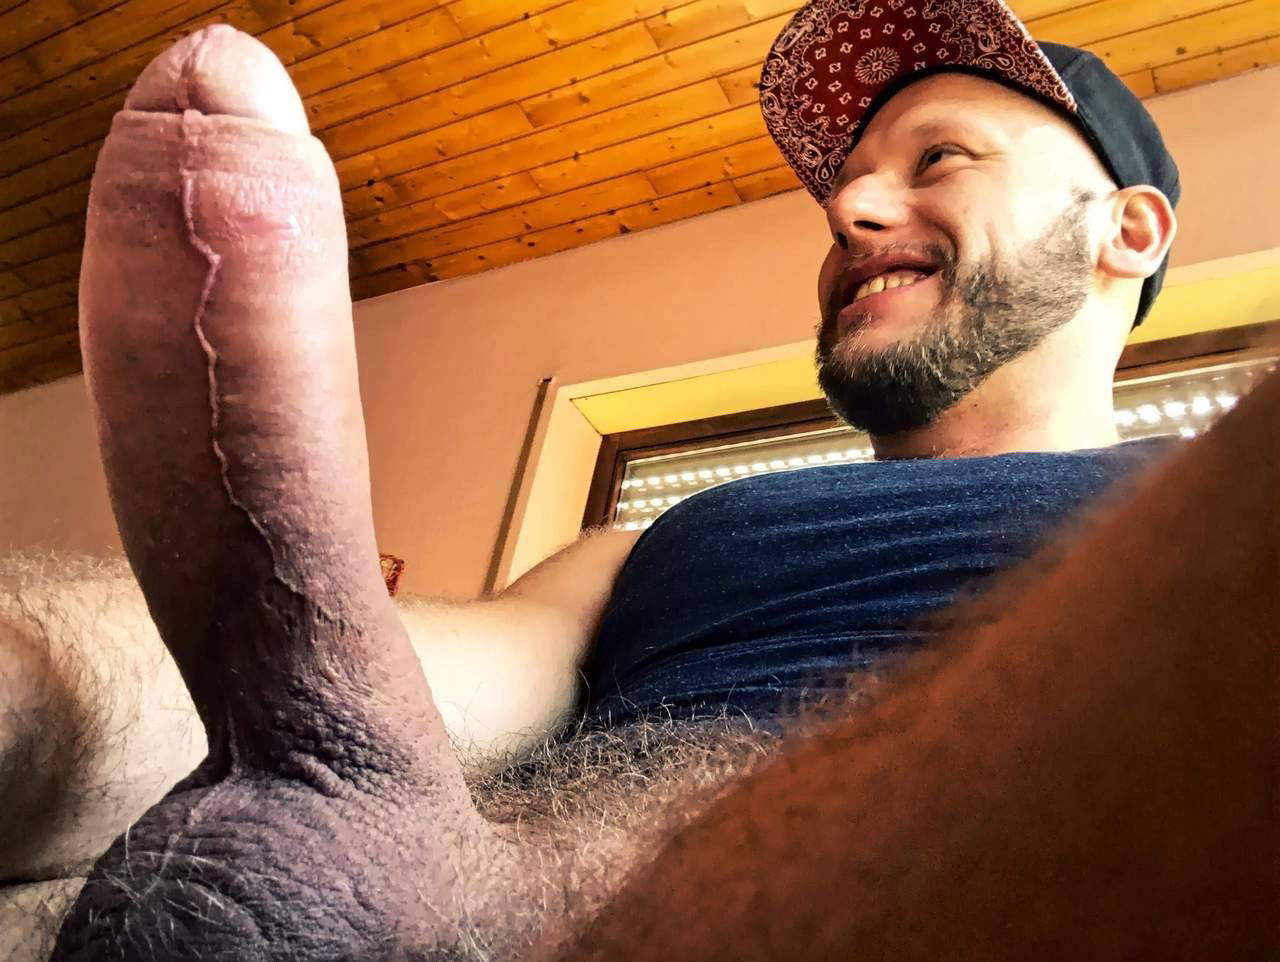 Watch the Photo by bald-butch with the username @bald-butch, posted on March 30, 2019. The post is about the topic GayExTumblr.